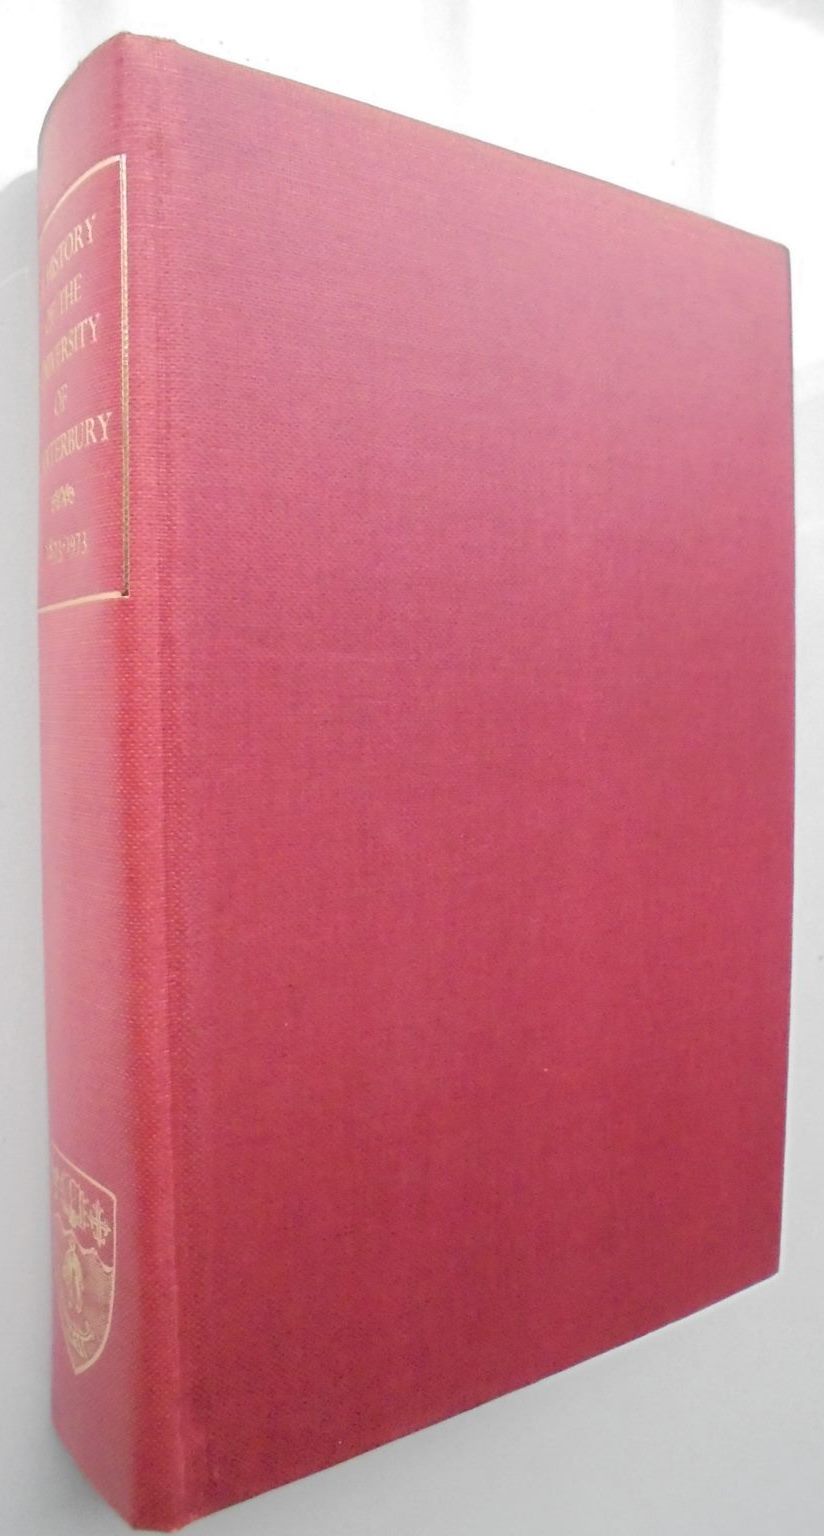 A History of the University of Canterbury, 1873-1973. By Gardner, W. J., Et al.